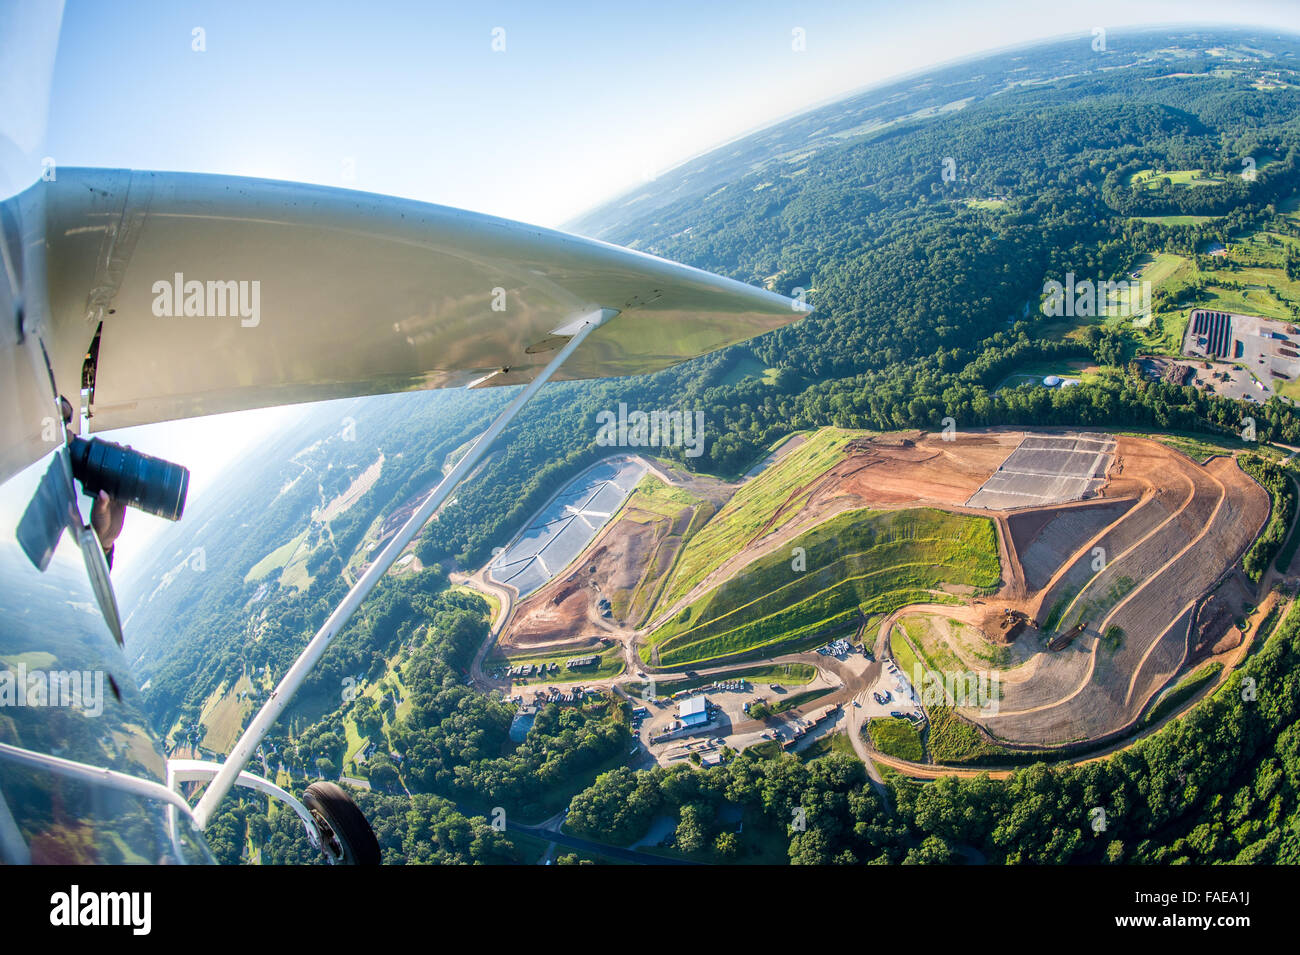 Airplane wing and aerial view of farmland in Harford County, Maryland Stock Photo